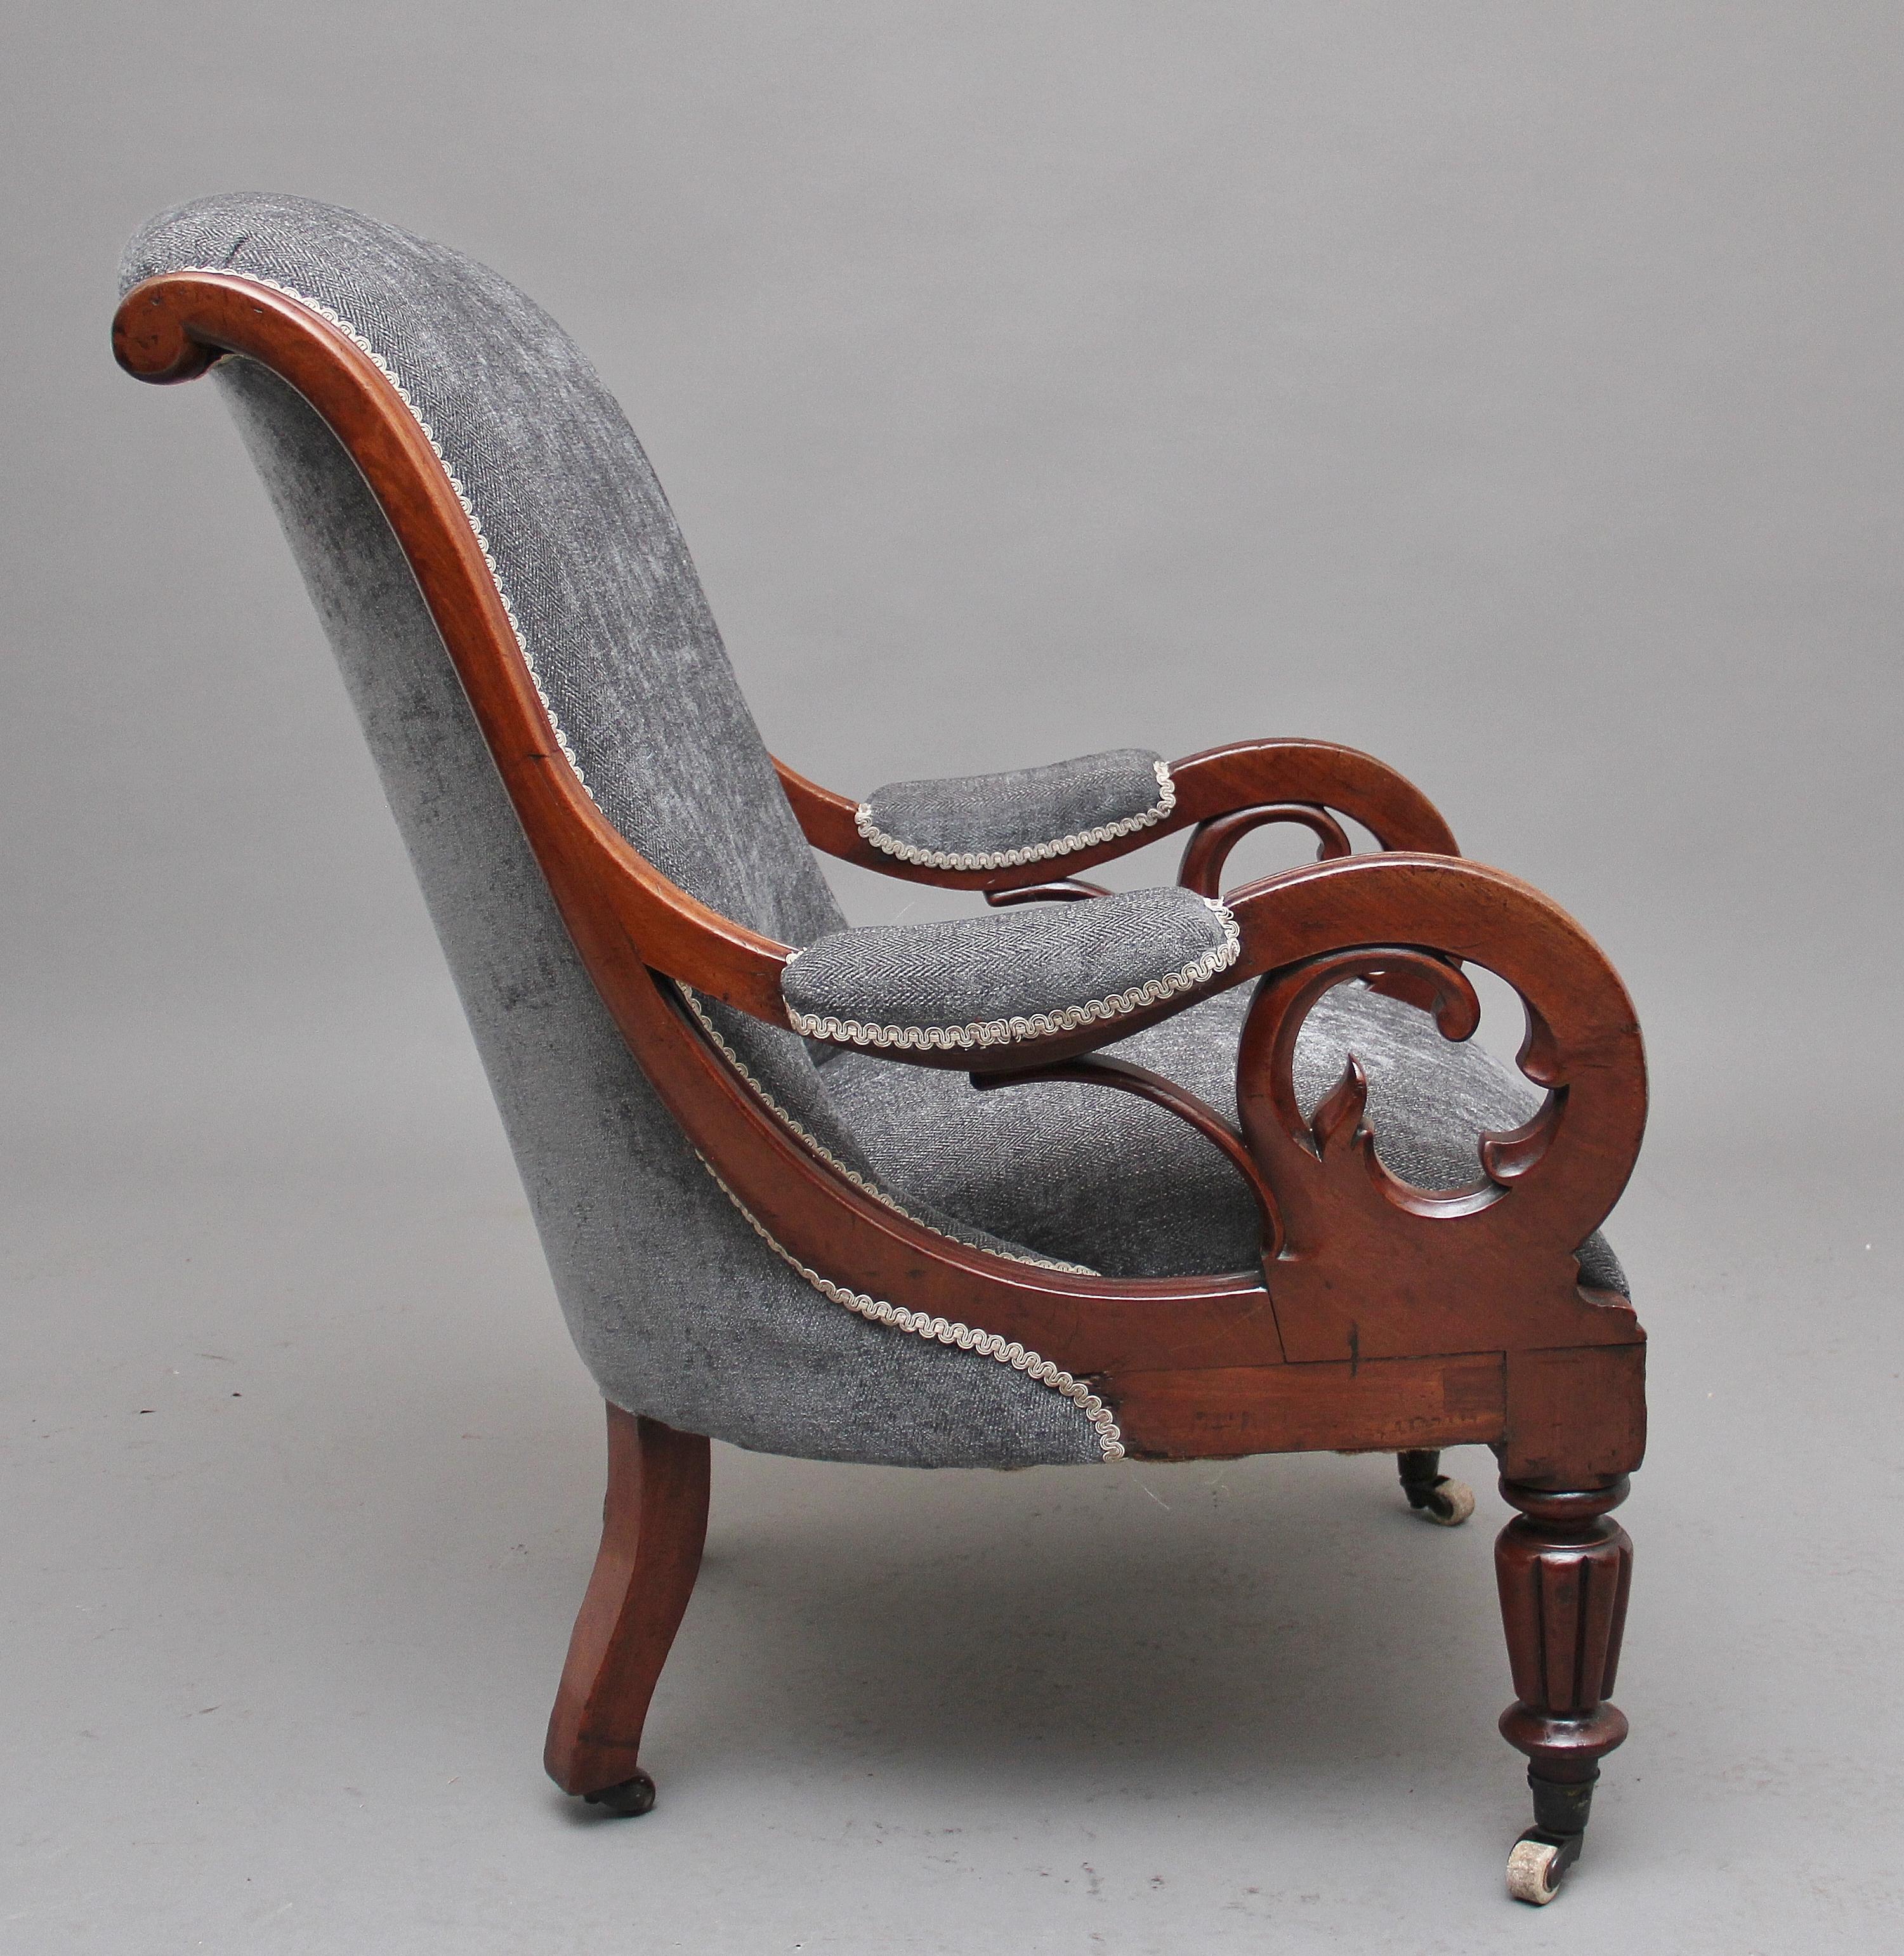 19th century mahogany library / open armchair upholstered in a grey fabric, the shaped and scroll back with padded arms, wonderful shaped arm supports with Gothic features, stuffover upholstered padded seat, supported on rear outswept legs and